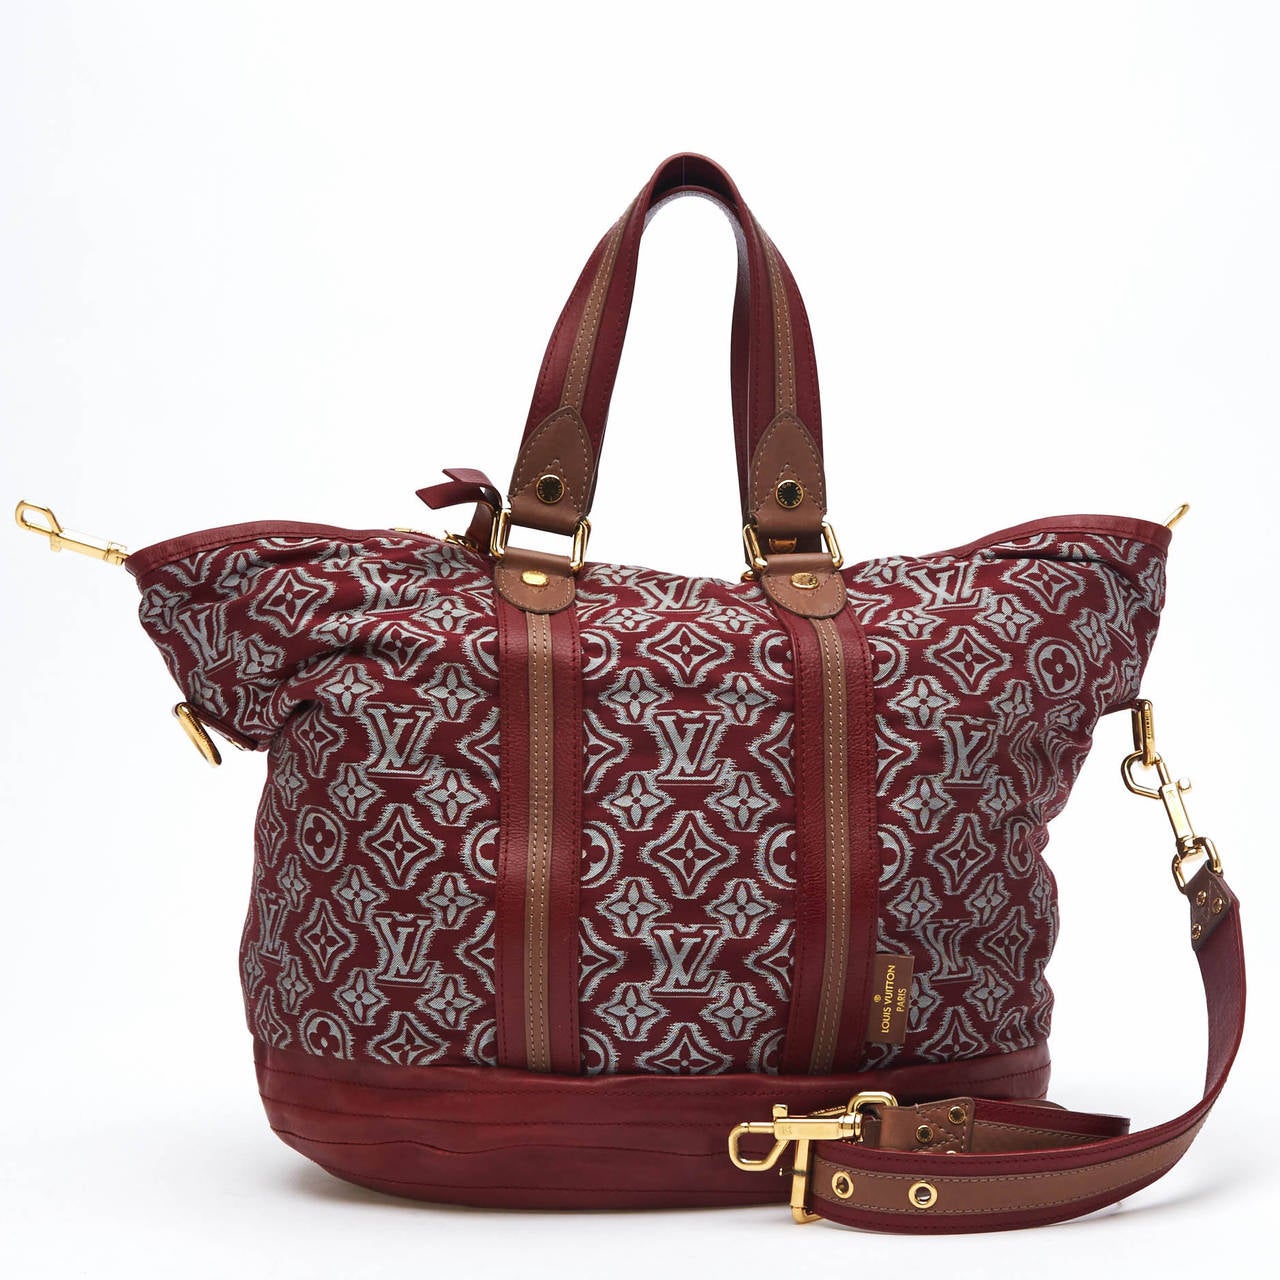 This Louis Vuitton Limited Edition Aviator Canvas is eye-catching. It features a thick monogram jacquard fabric on a slouchy silhouette, and is accented with a plum red leather base and striped handles. It is accented with gold tone hardware. It